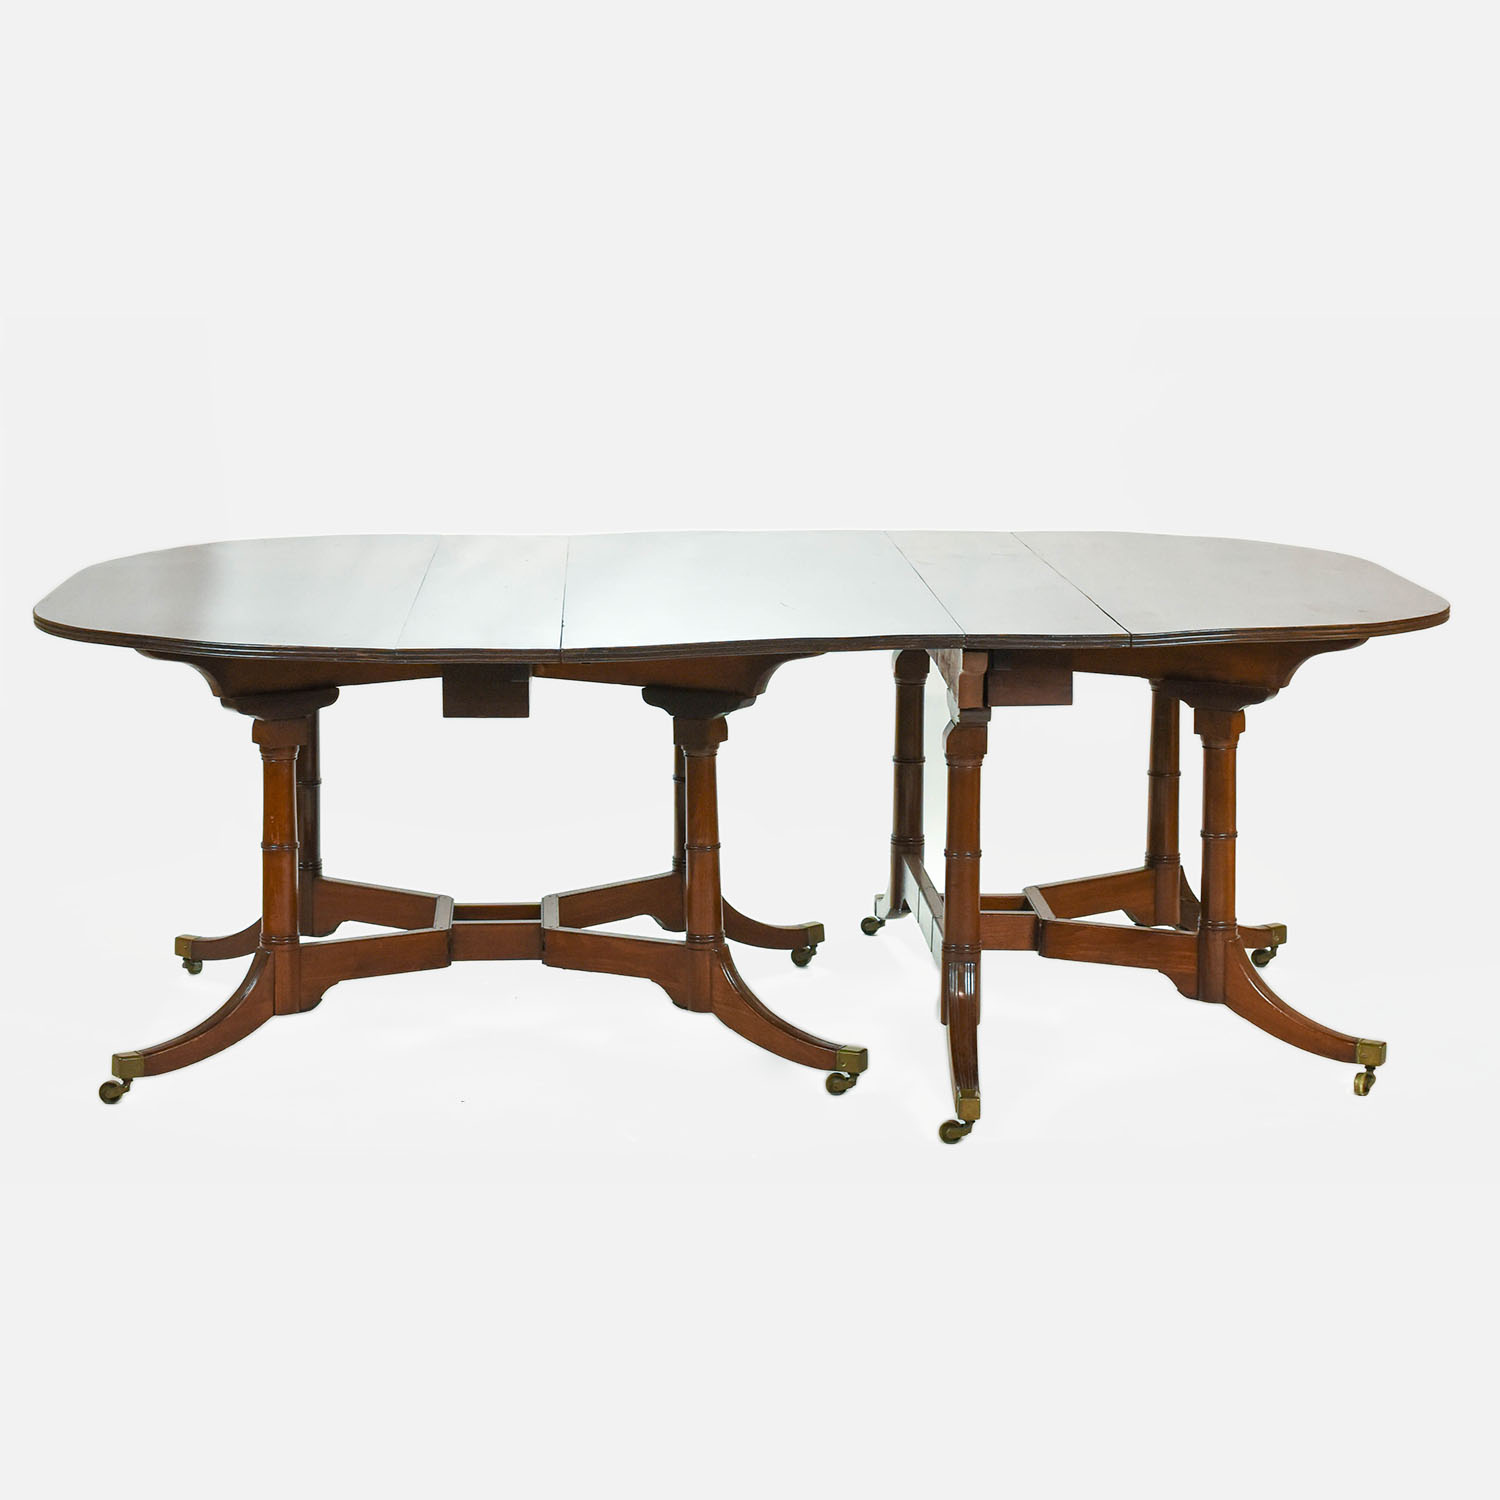 Early 1820 Antique Mahogany Drop-Leaf Dining Table